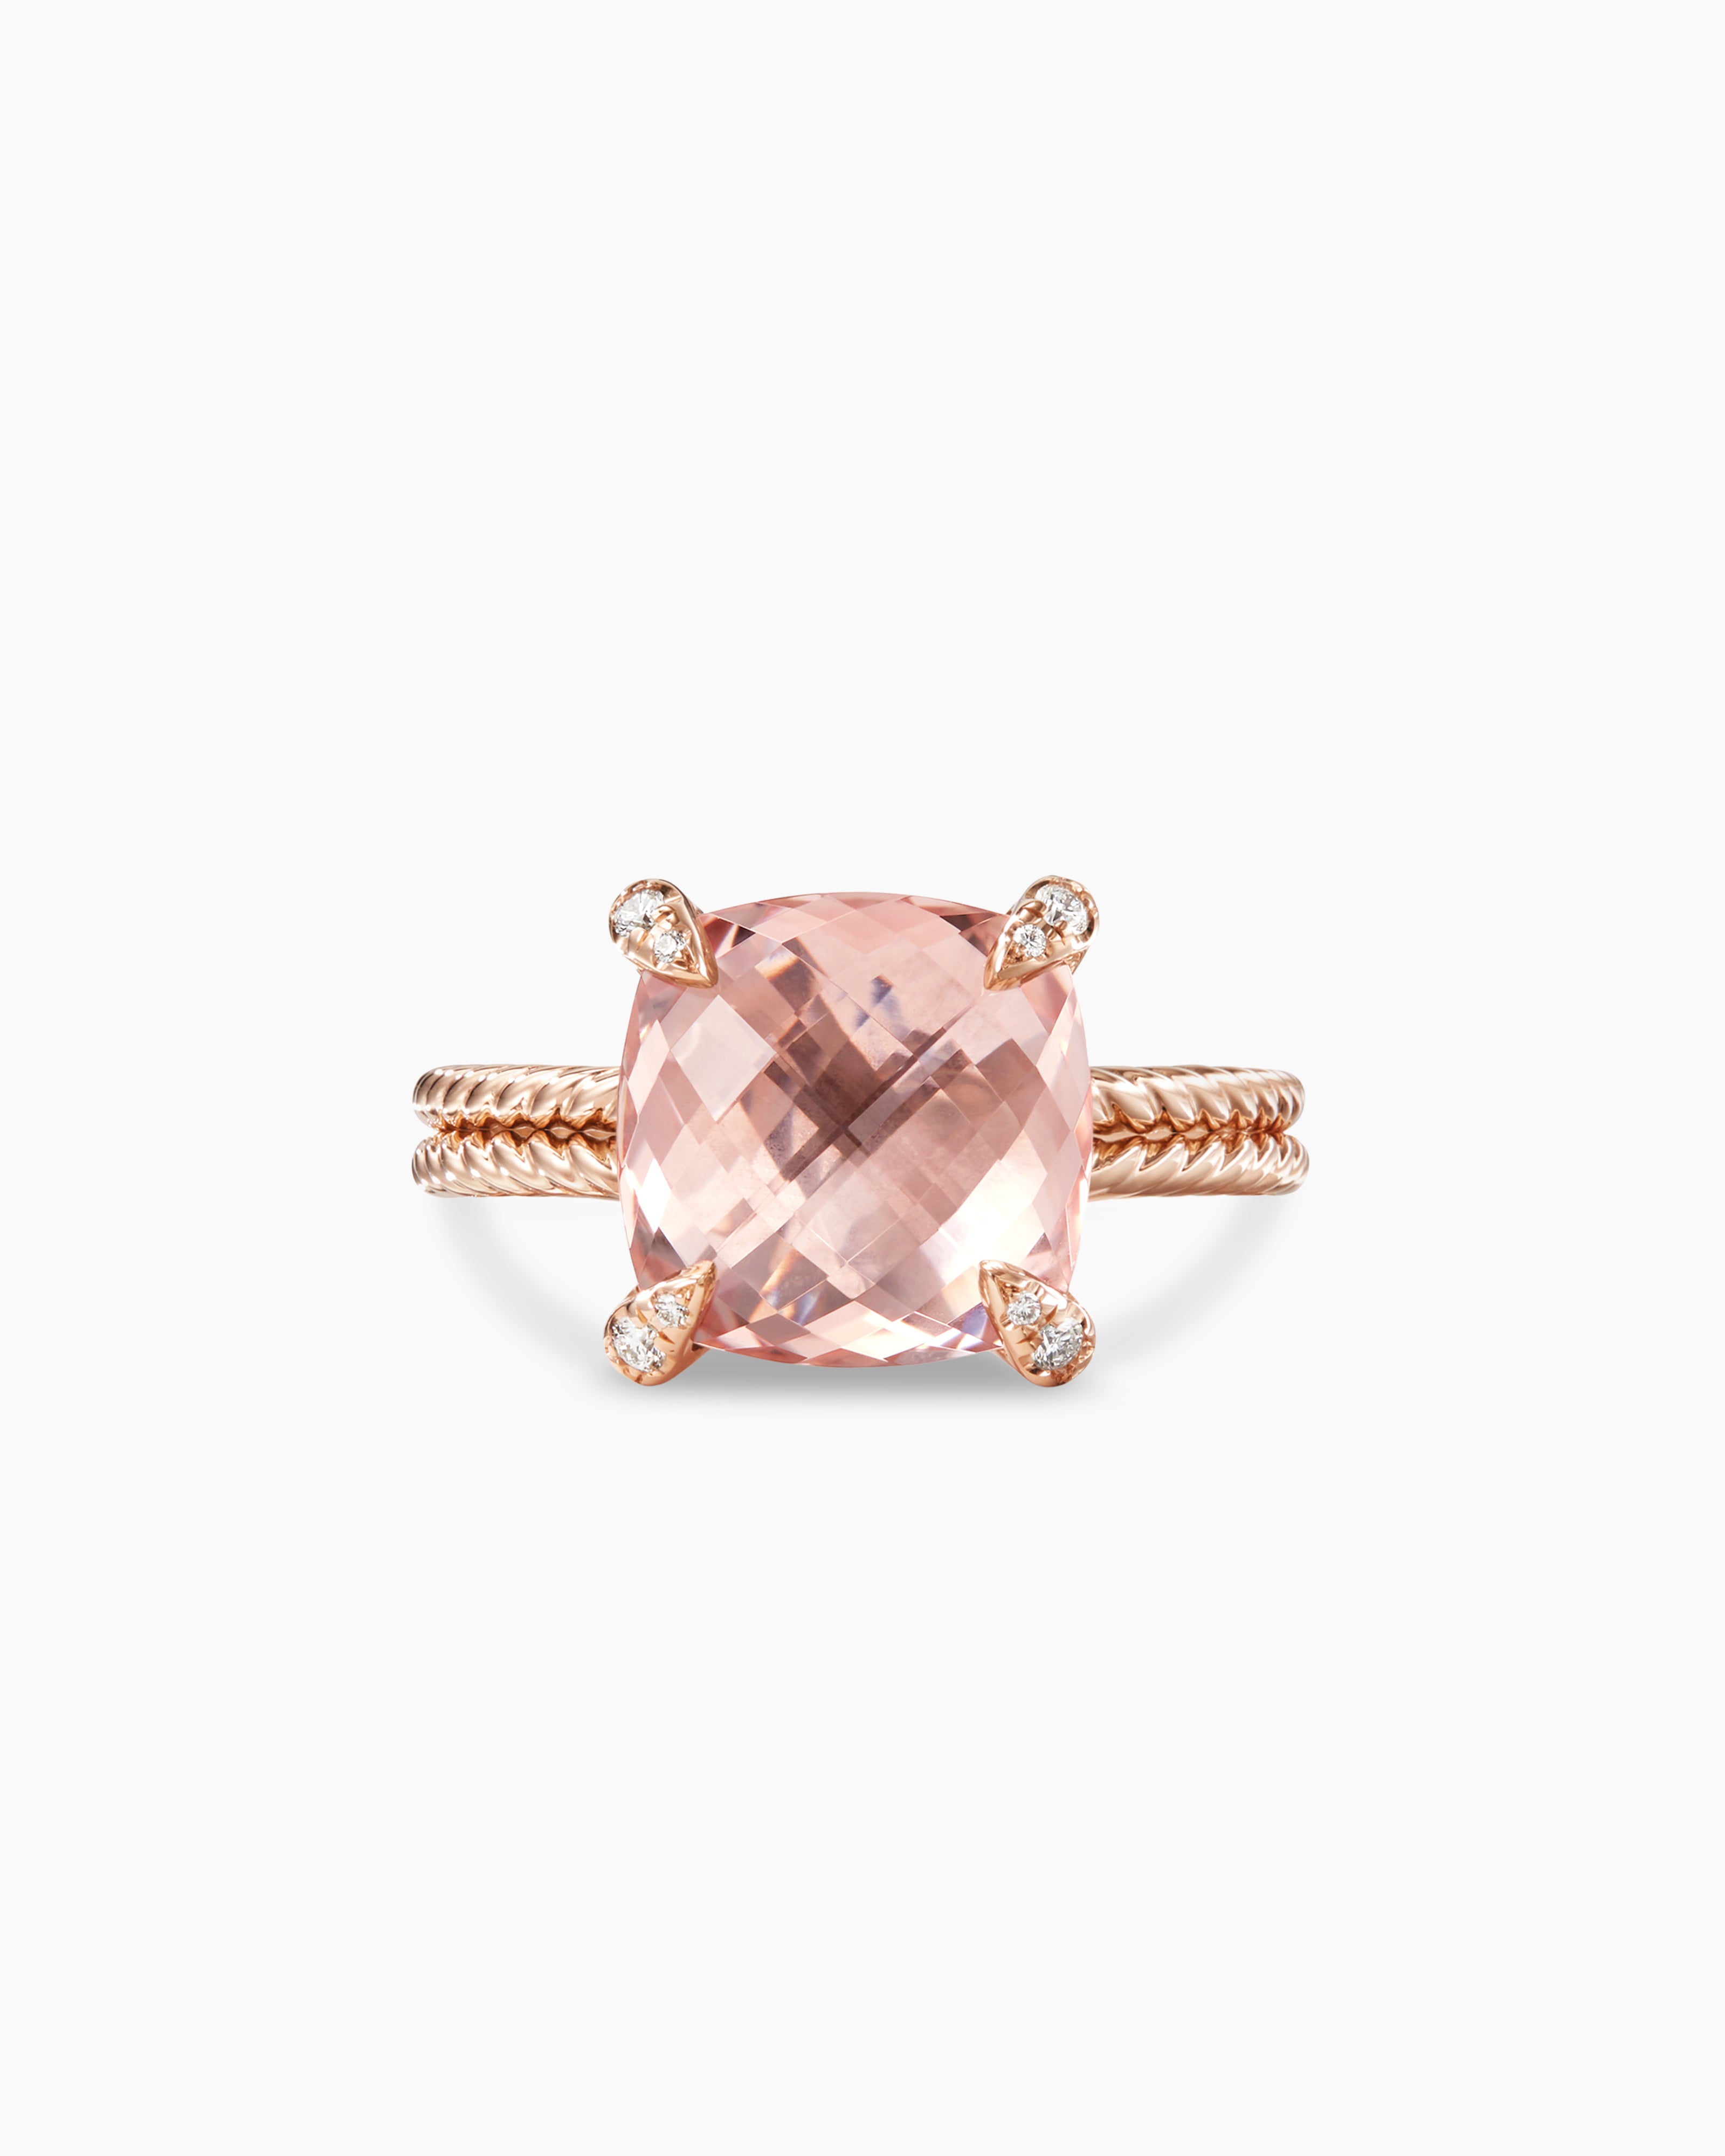 David Yurman Chatelaine Ring with Morganite and Diamonds in 18K Rose Gold - pink/rose Gold